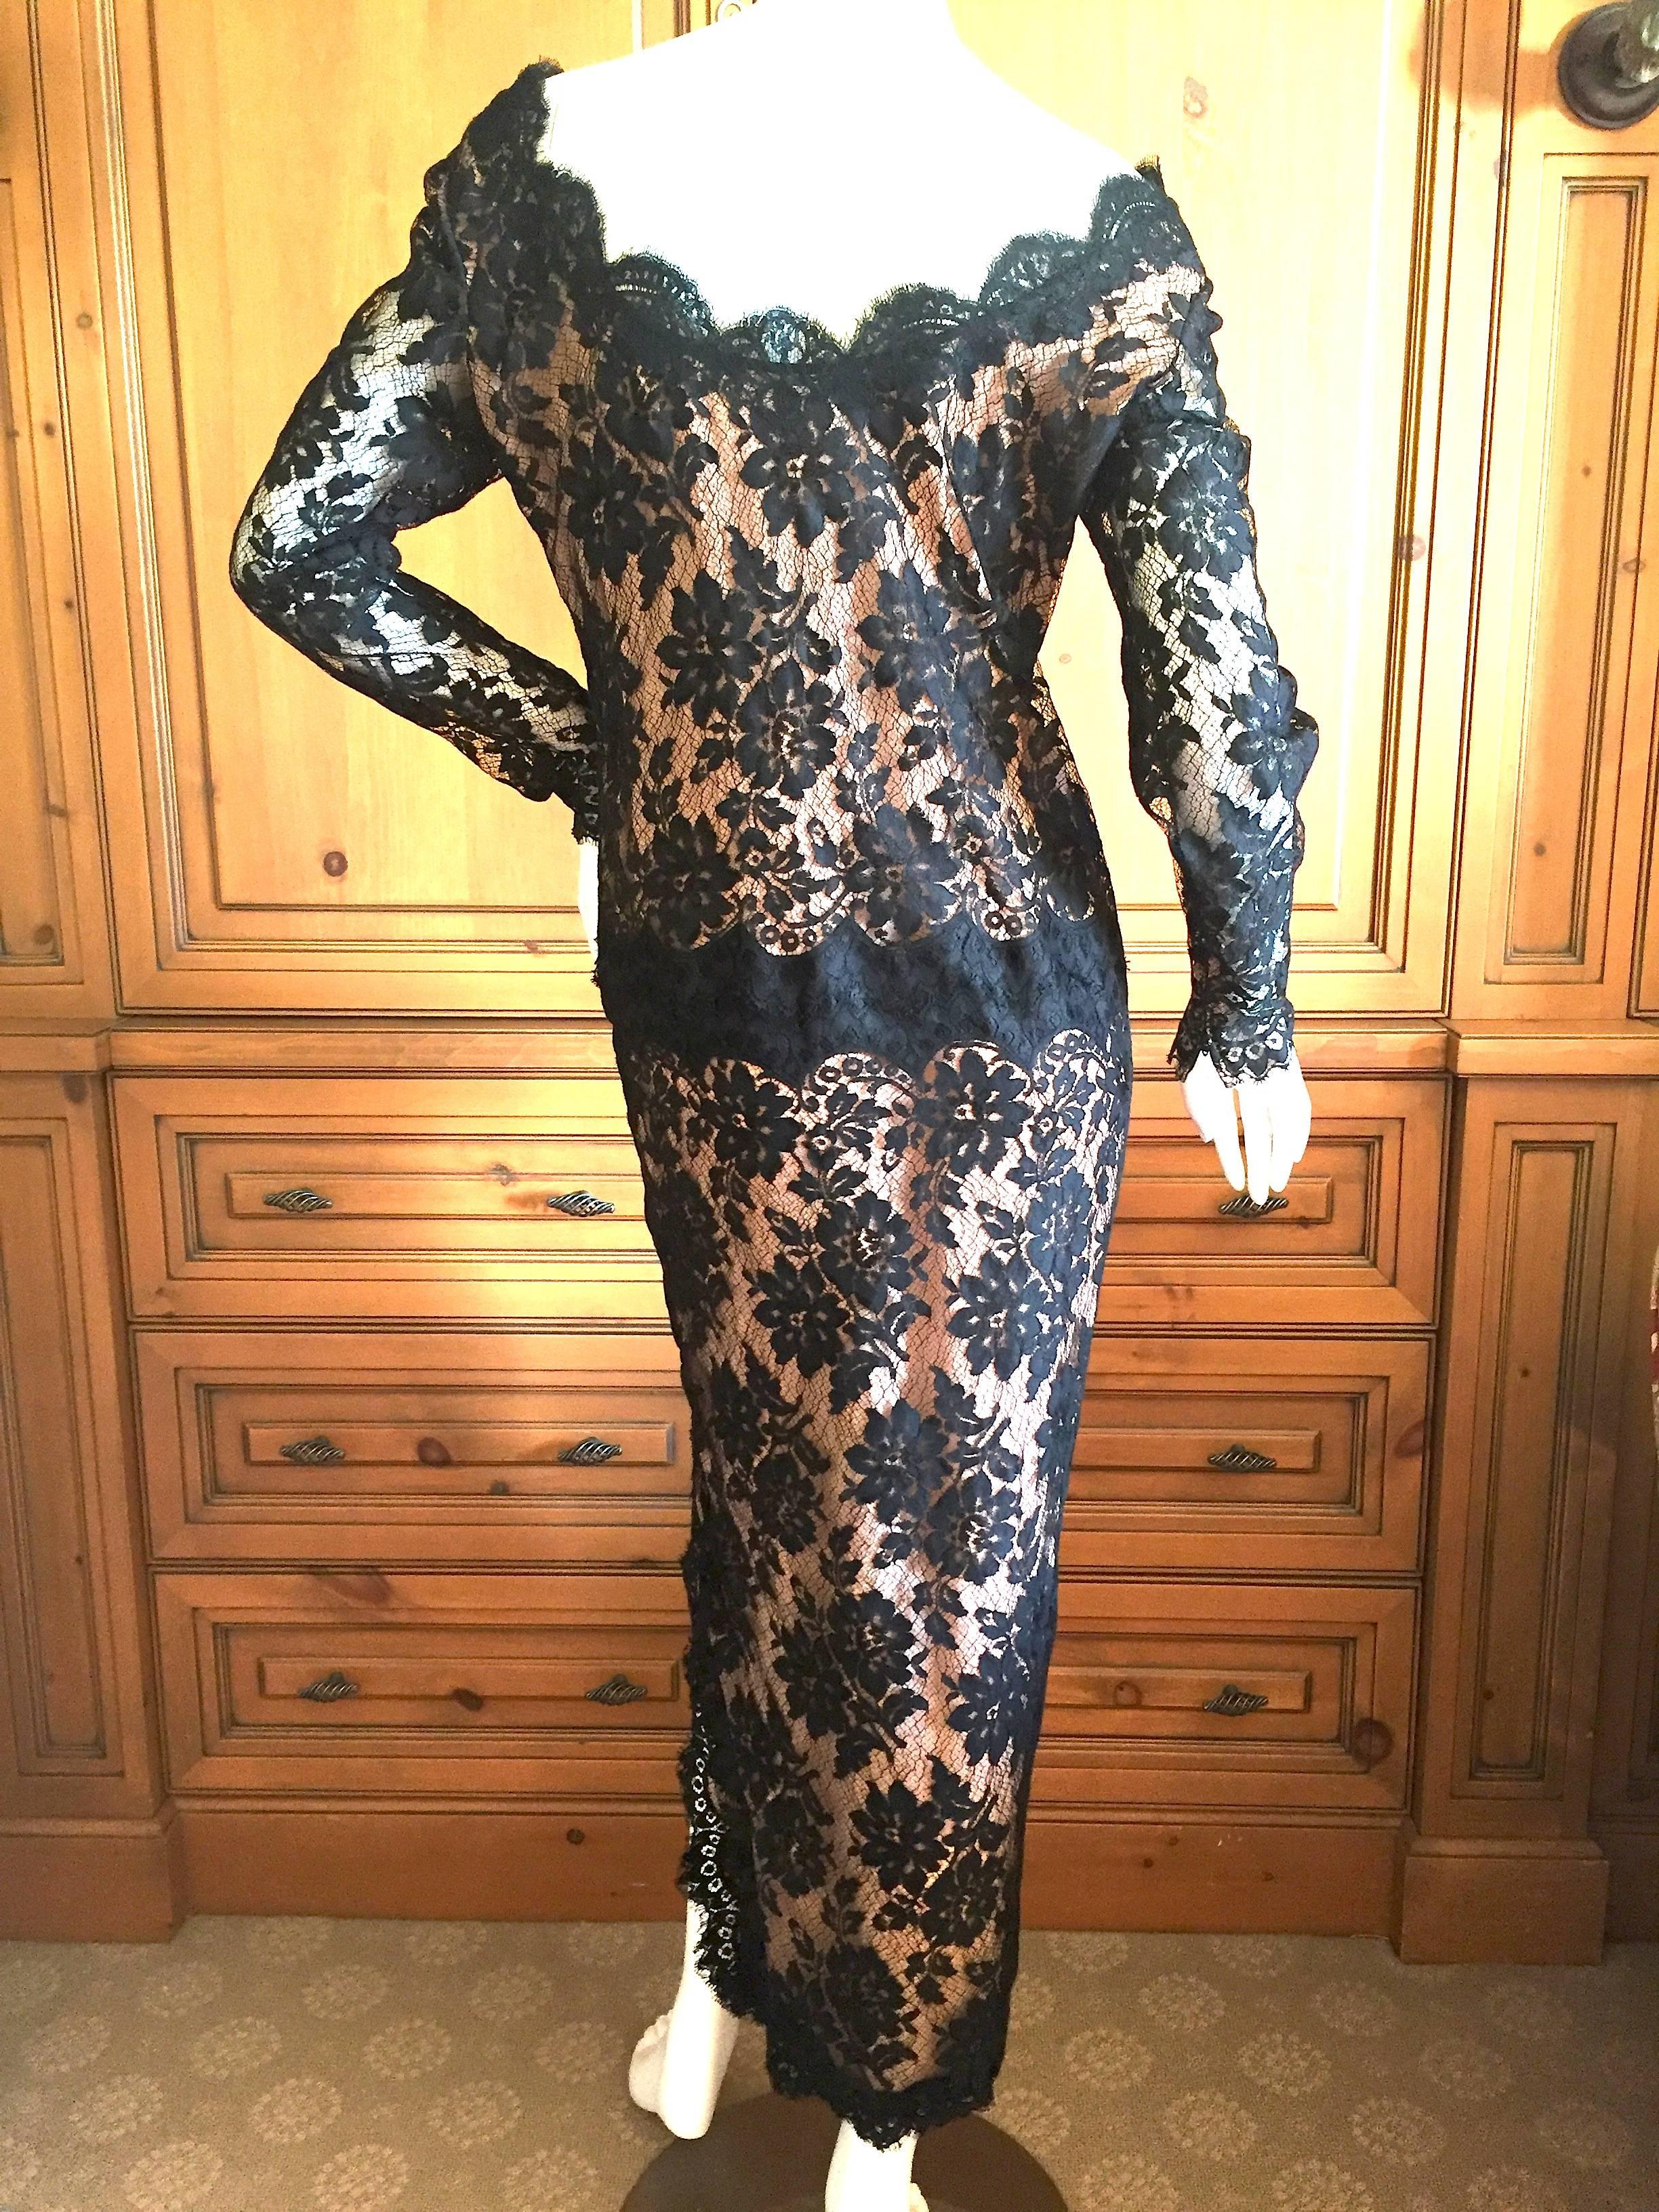 Galanos Black Lace Evening Dress In Excellent Condition For Sale In Cloverdale, CA